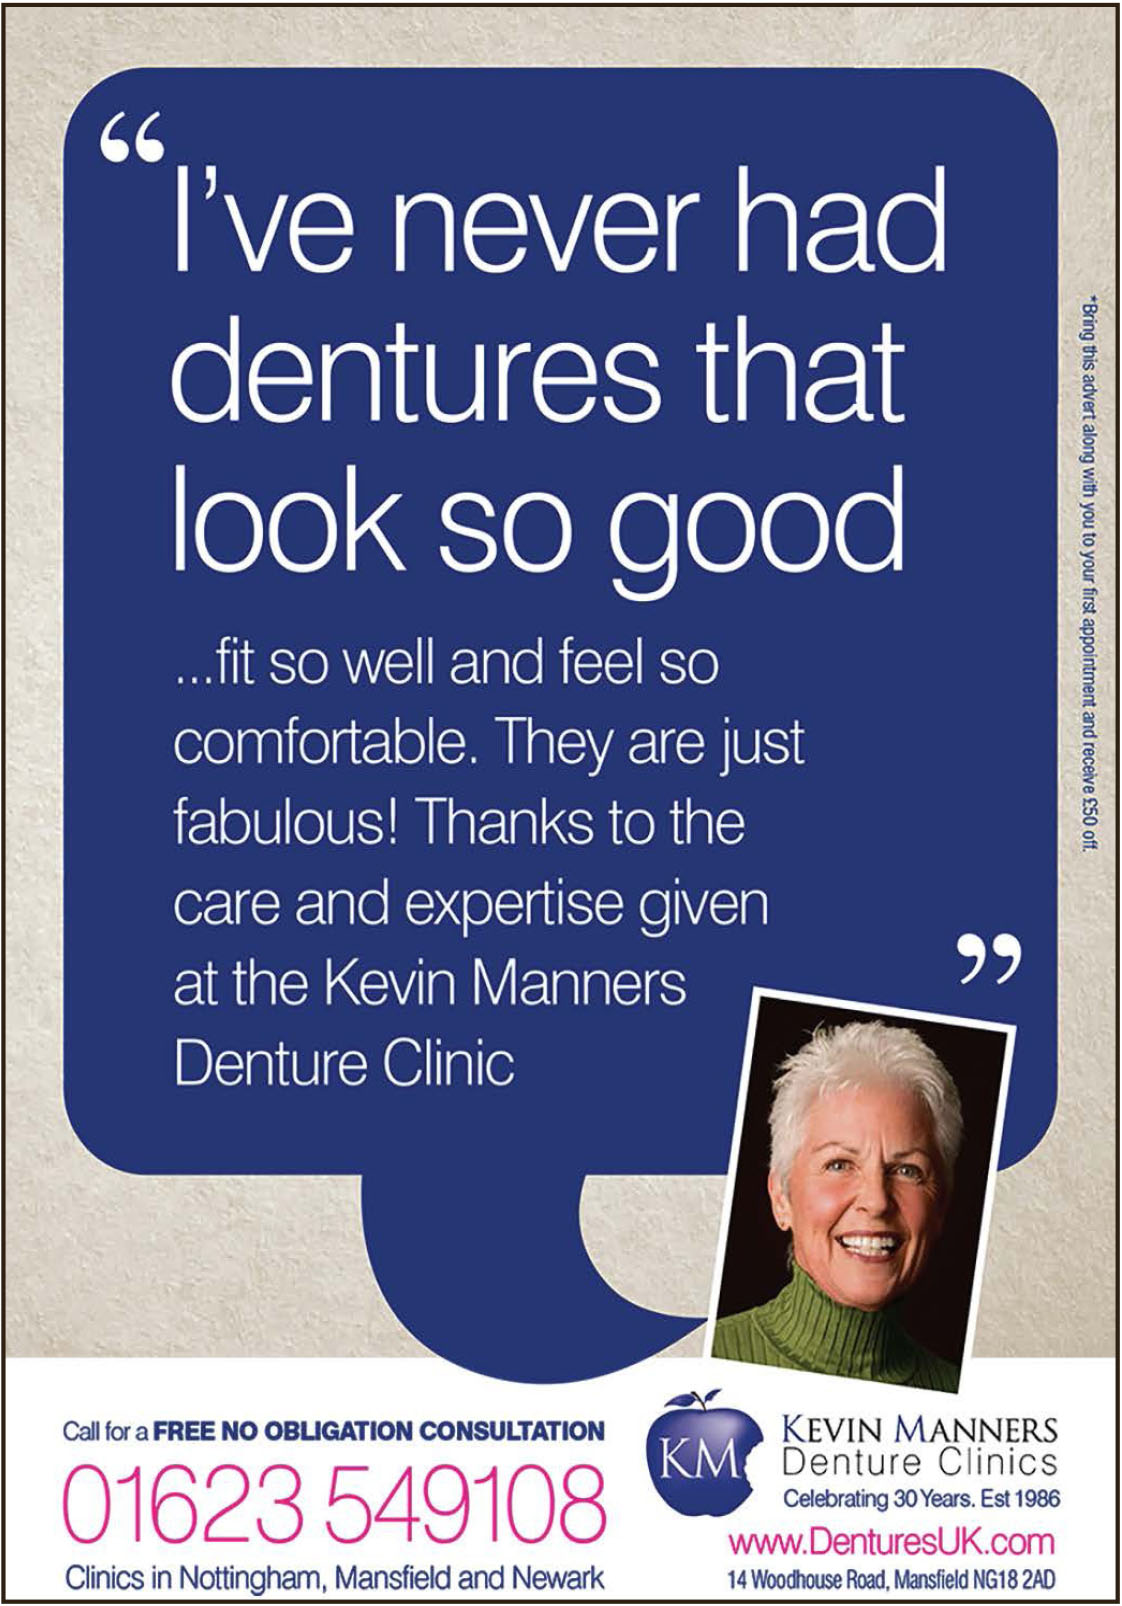 Kevin Manners Denture Clinics